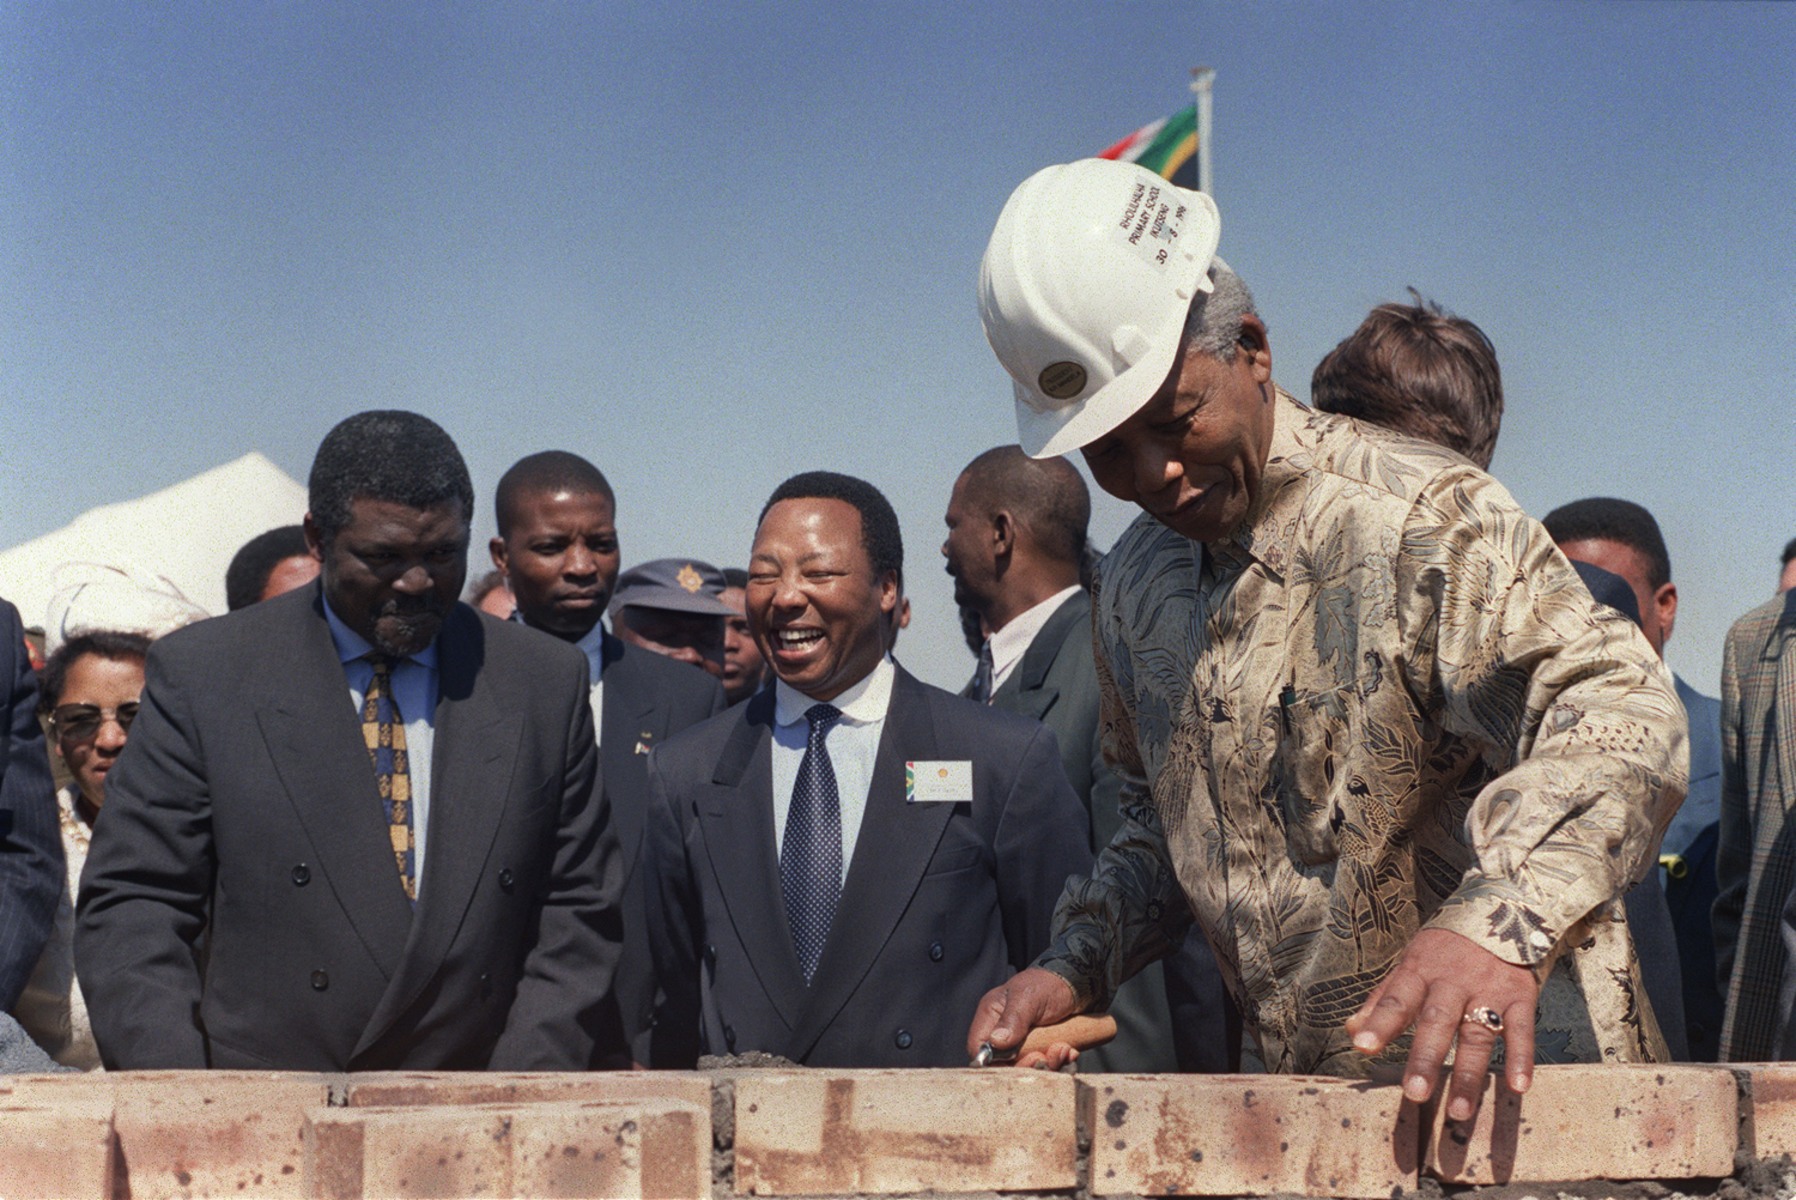 Nelson Mandela legacy includes lasting mark on pop culture - TODAY.com